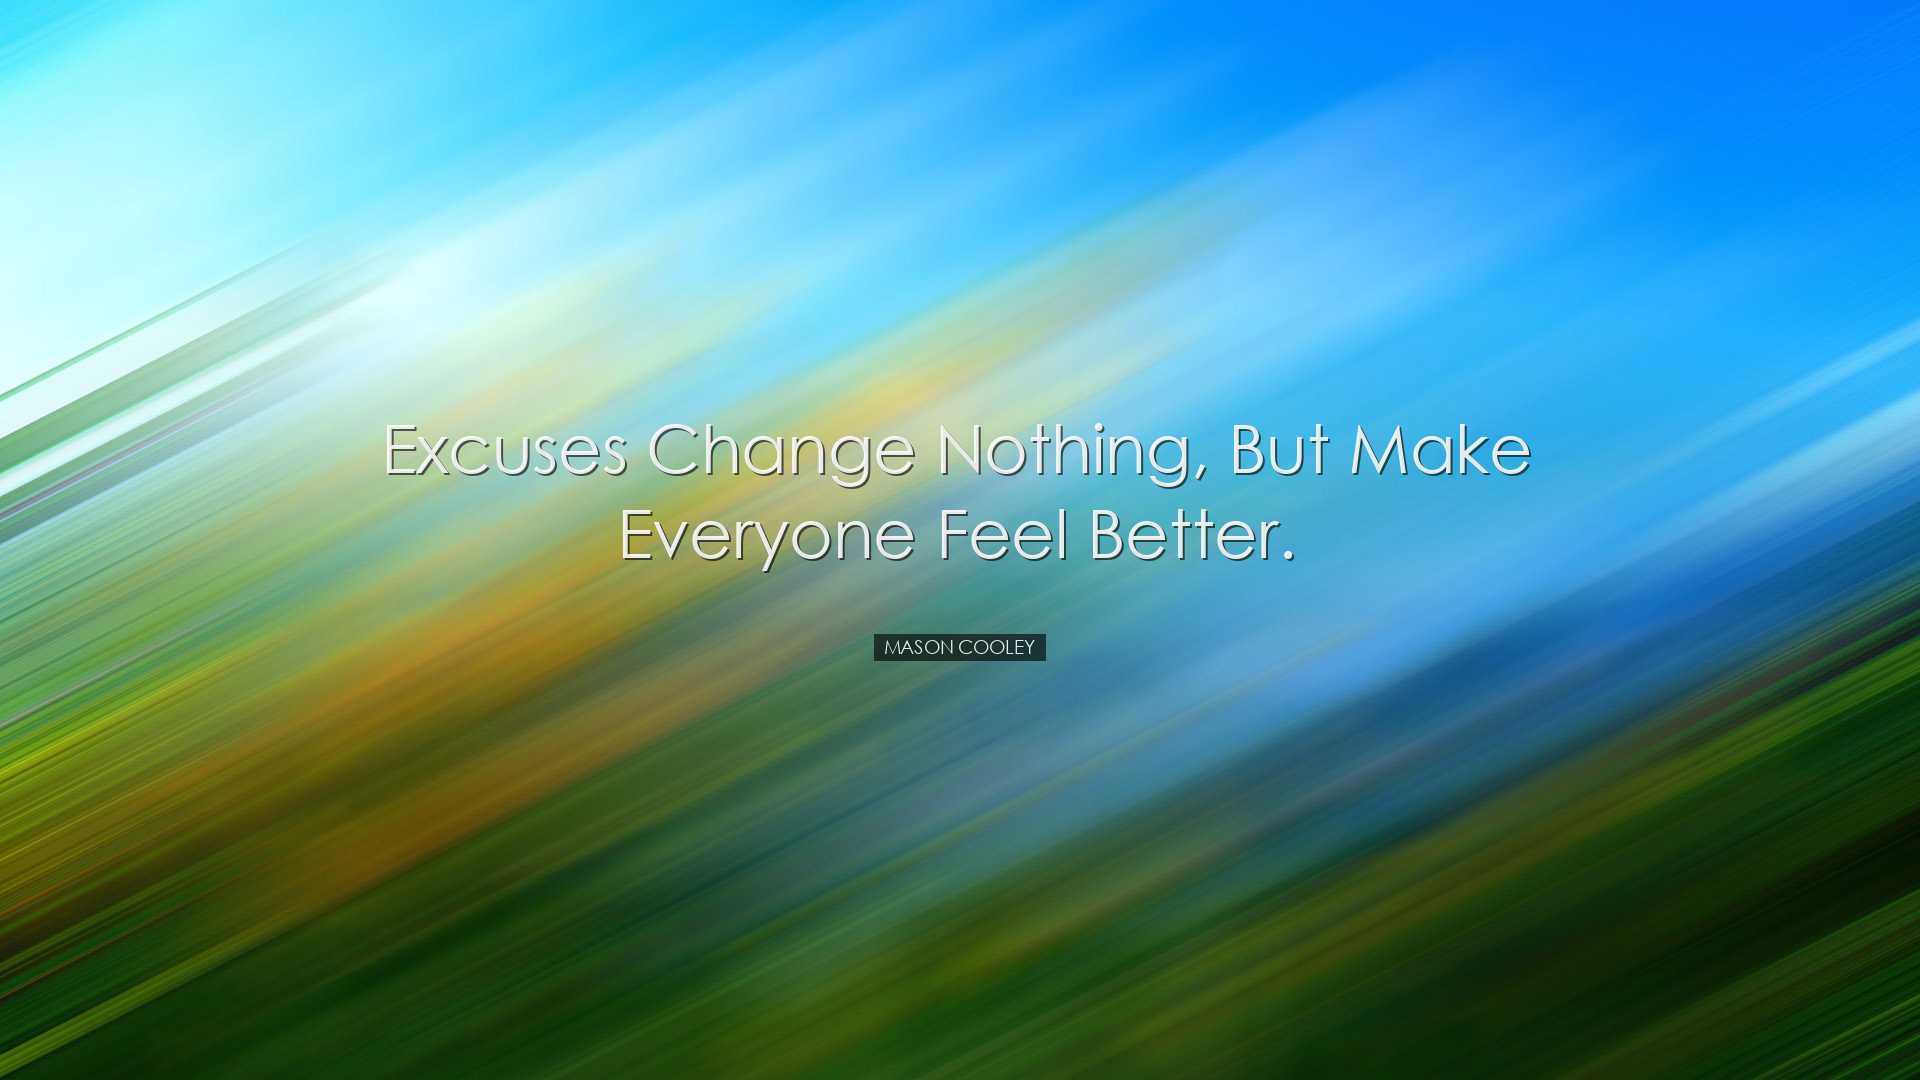 Excuses change nothing, but make everyone feel better. - Mason Coo